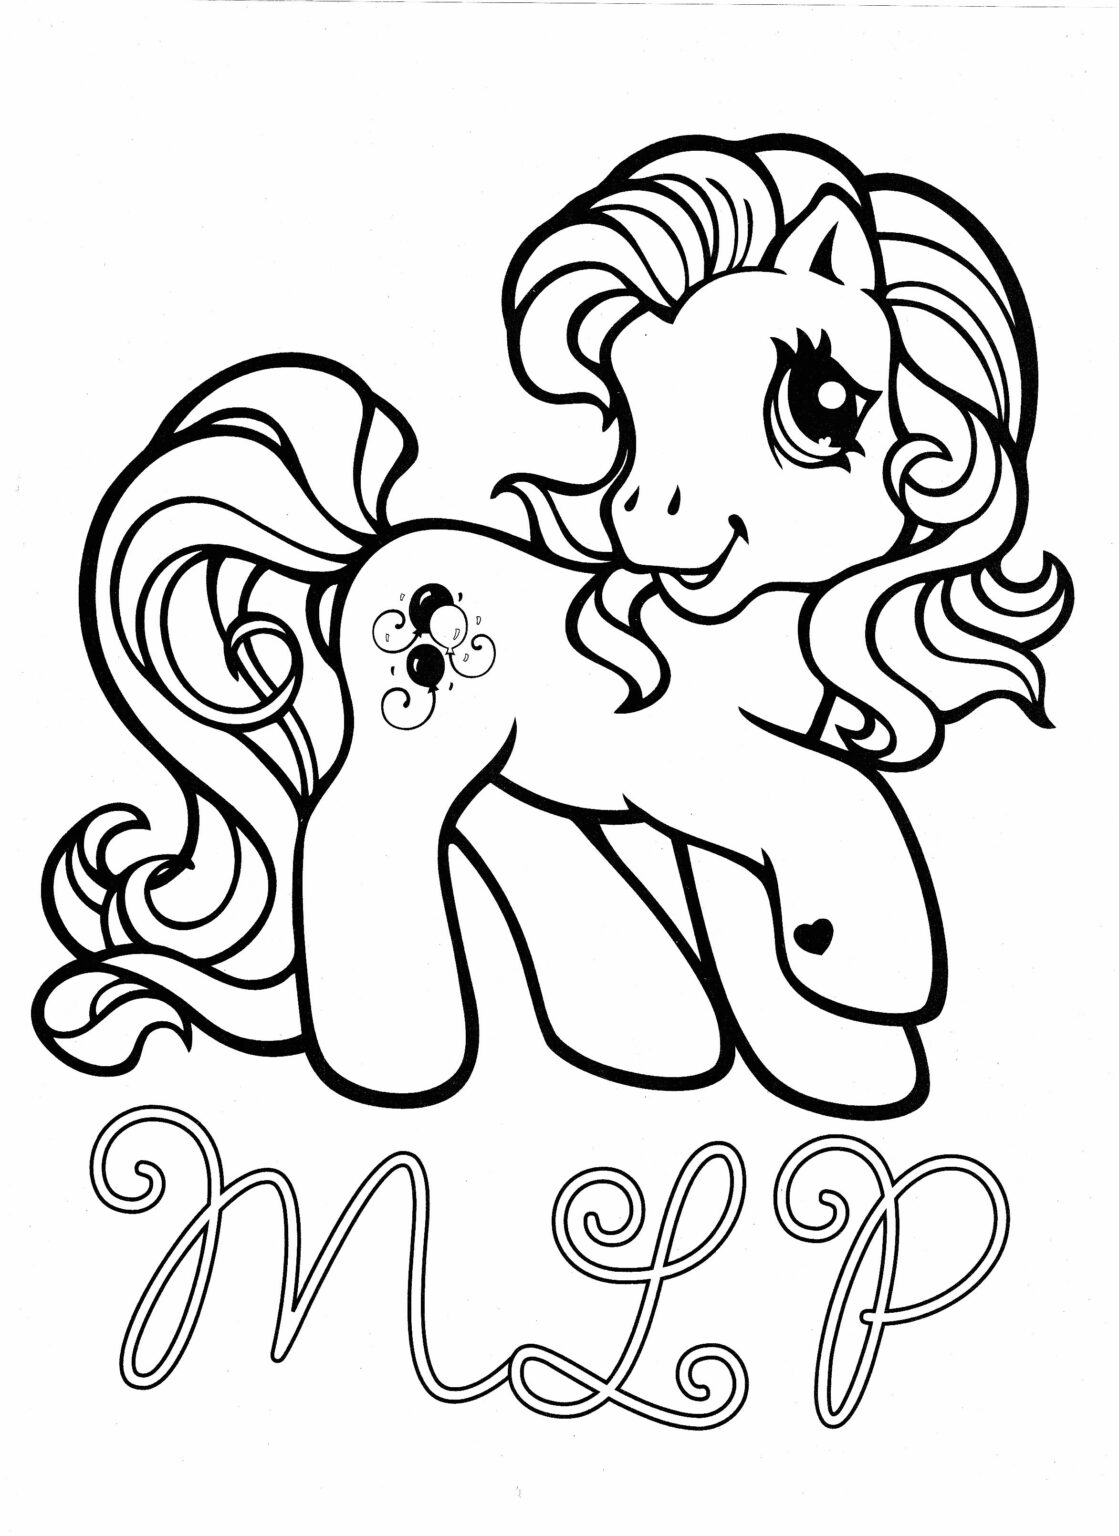 Funny Pinkie Pie Coloring Pages Pdf To Print - Coloringfolder.com